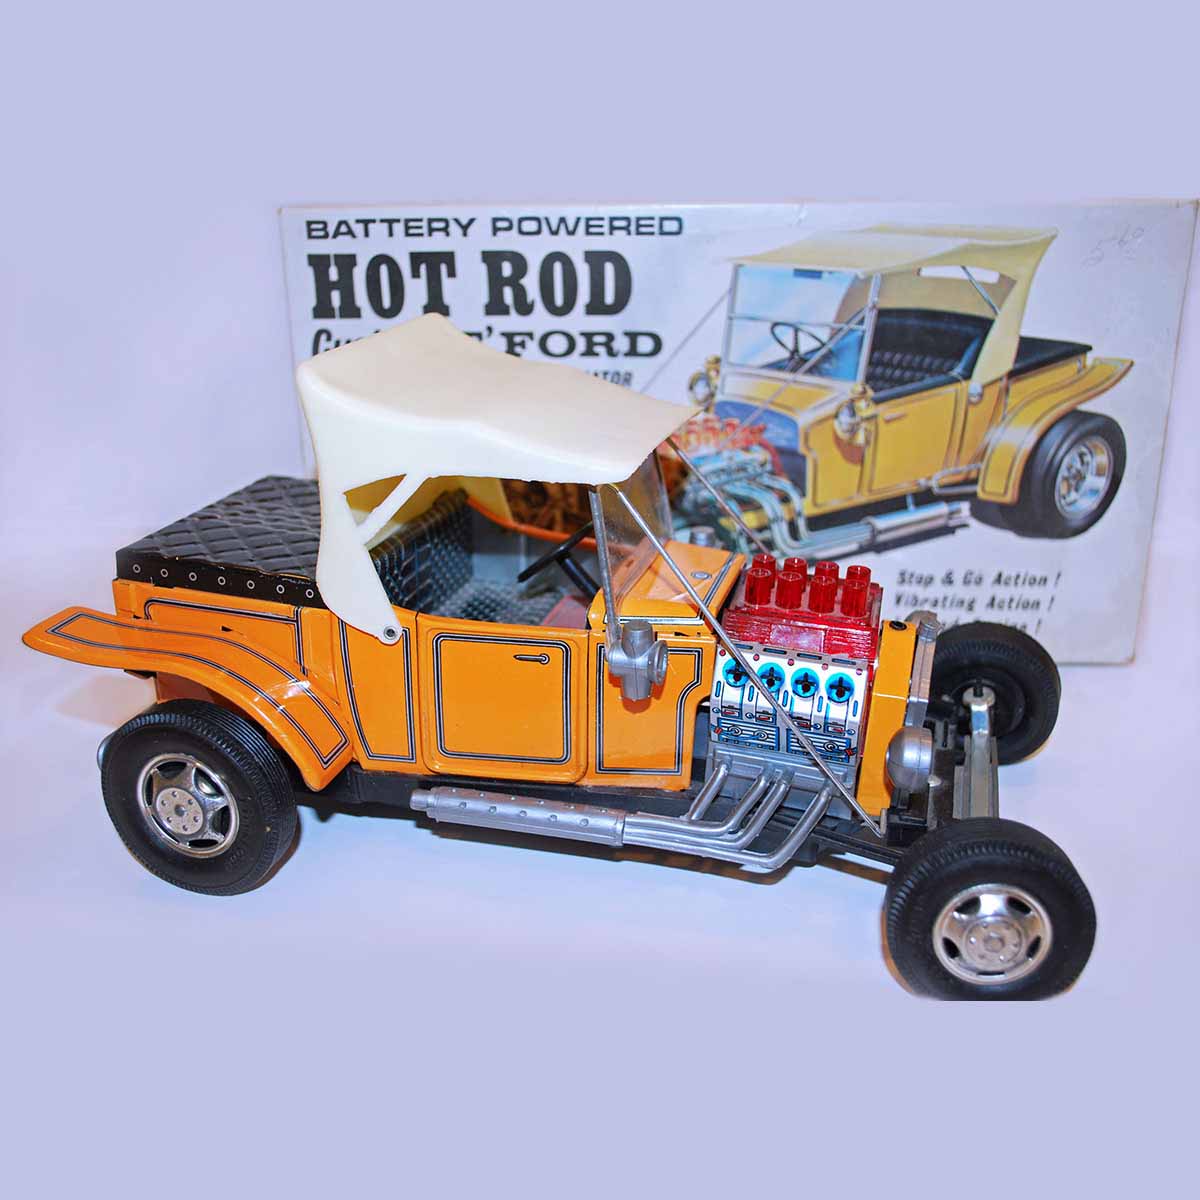 https://www.unclealstoys.com/wp-content/uploads/2021/06/Alps-Battery-Powered-HOT-ROD-Custom-T-Ford-In-Box-1.jpg